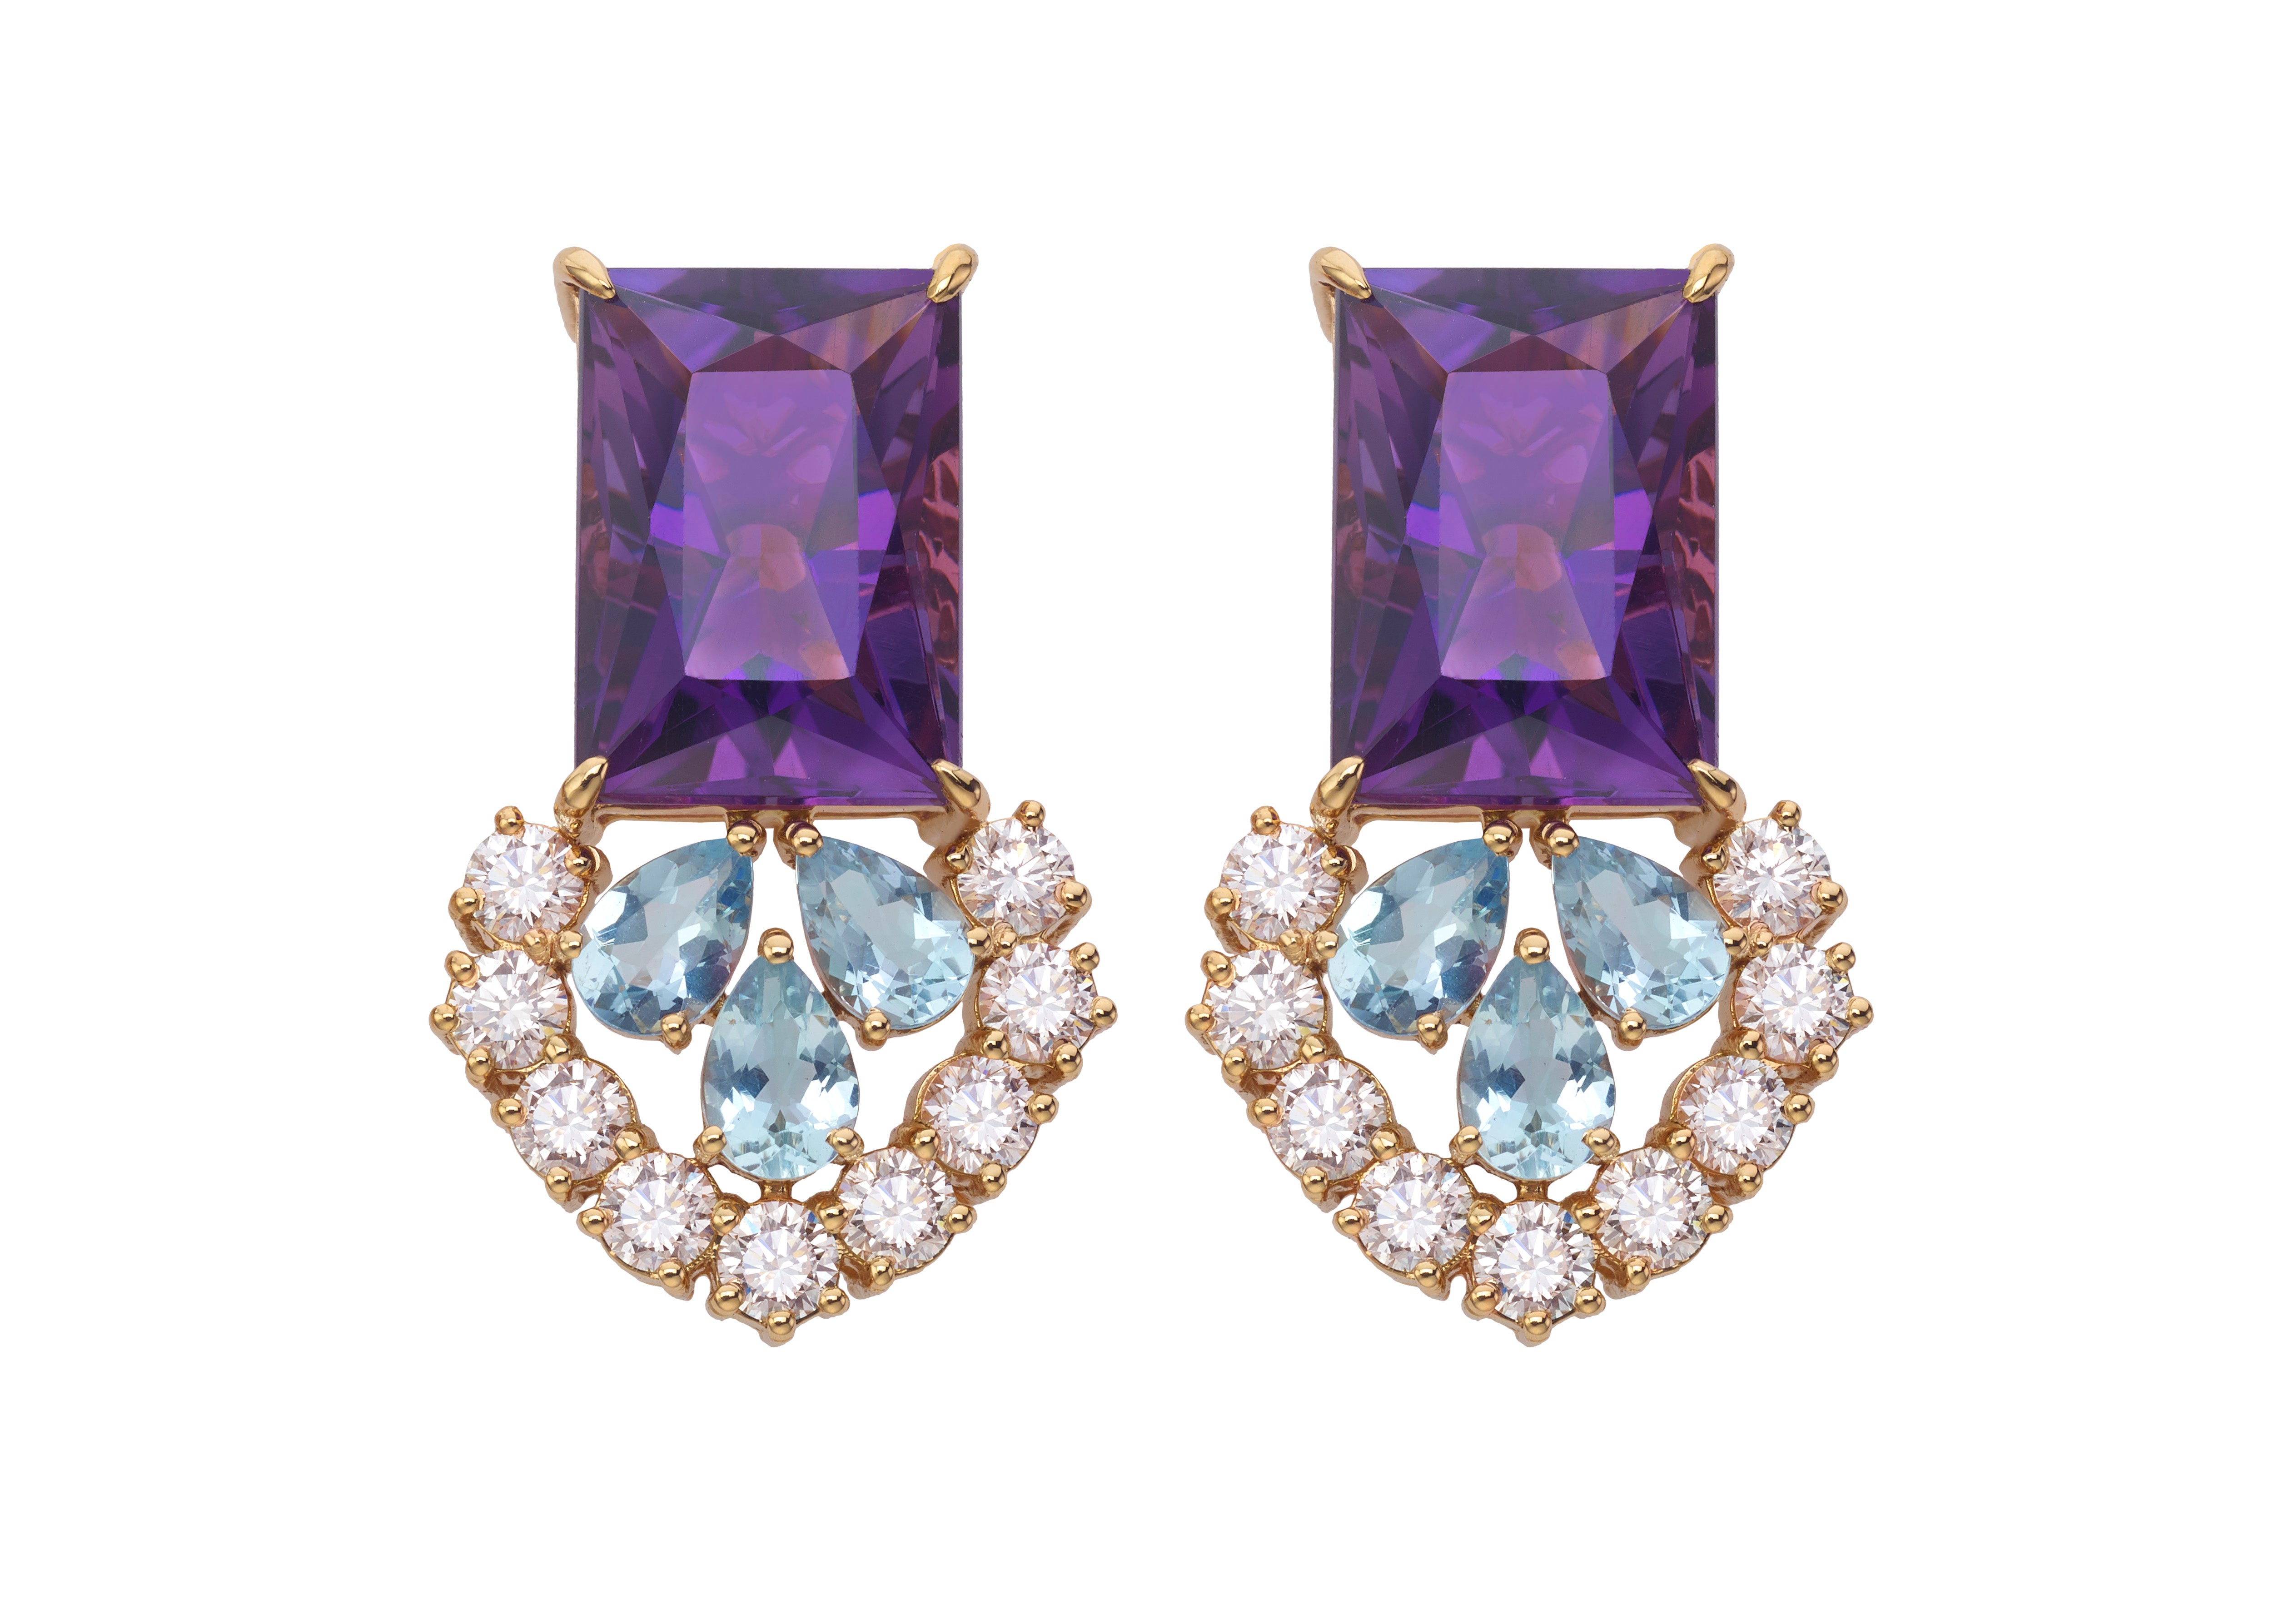 Clusters of Elegance Earrings - Amythyst and Aquamarine